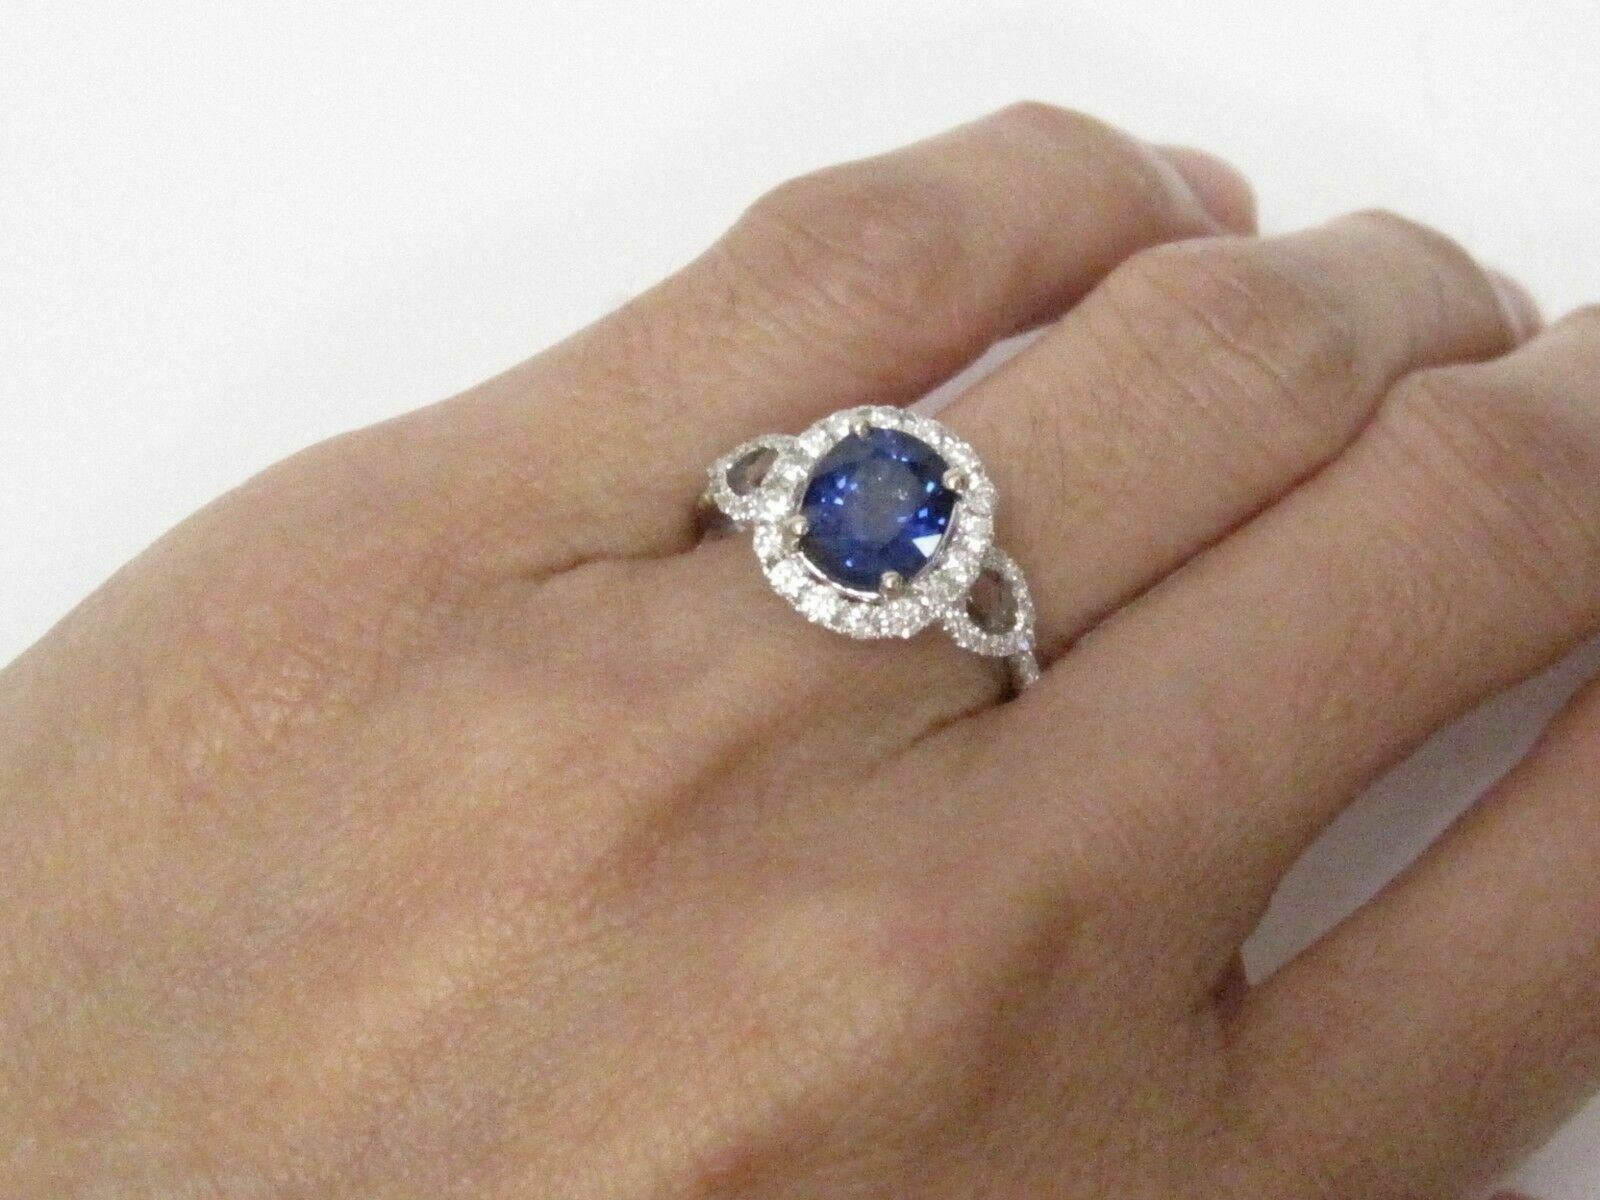 3.18 TCW Natural Blue Sapphire & Diamond Accents Ring Size 6 14k White Gold